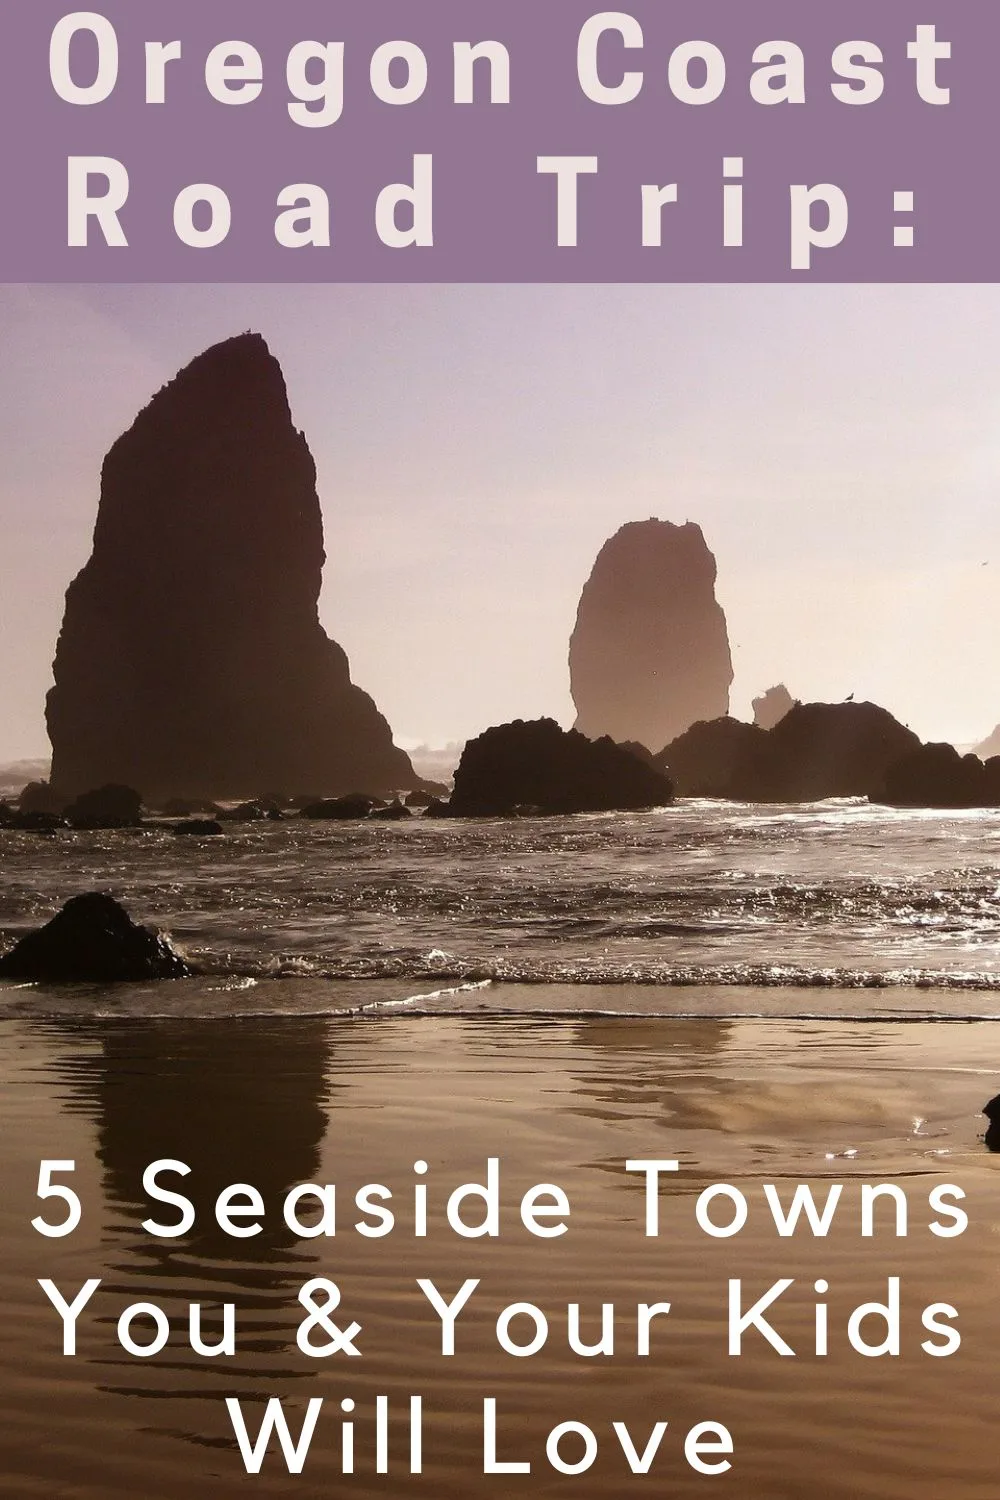 5 seaside stops on an oregon coast road trip with kids. unique beches plus quintessential towns and recommended hotels for overnight stops.